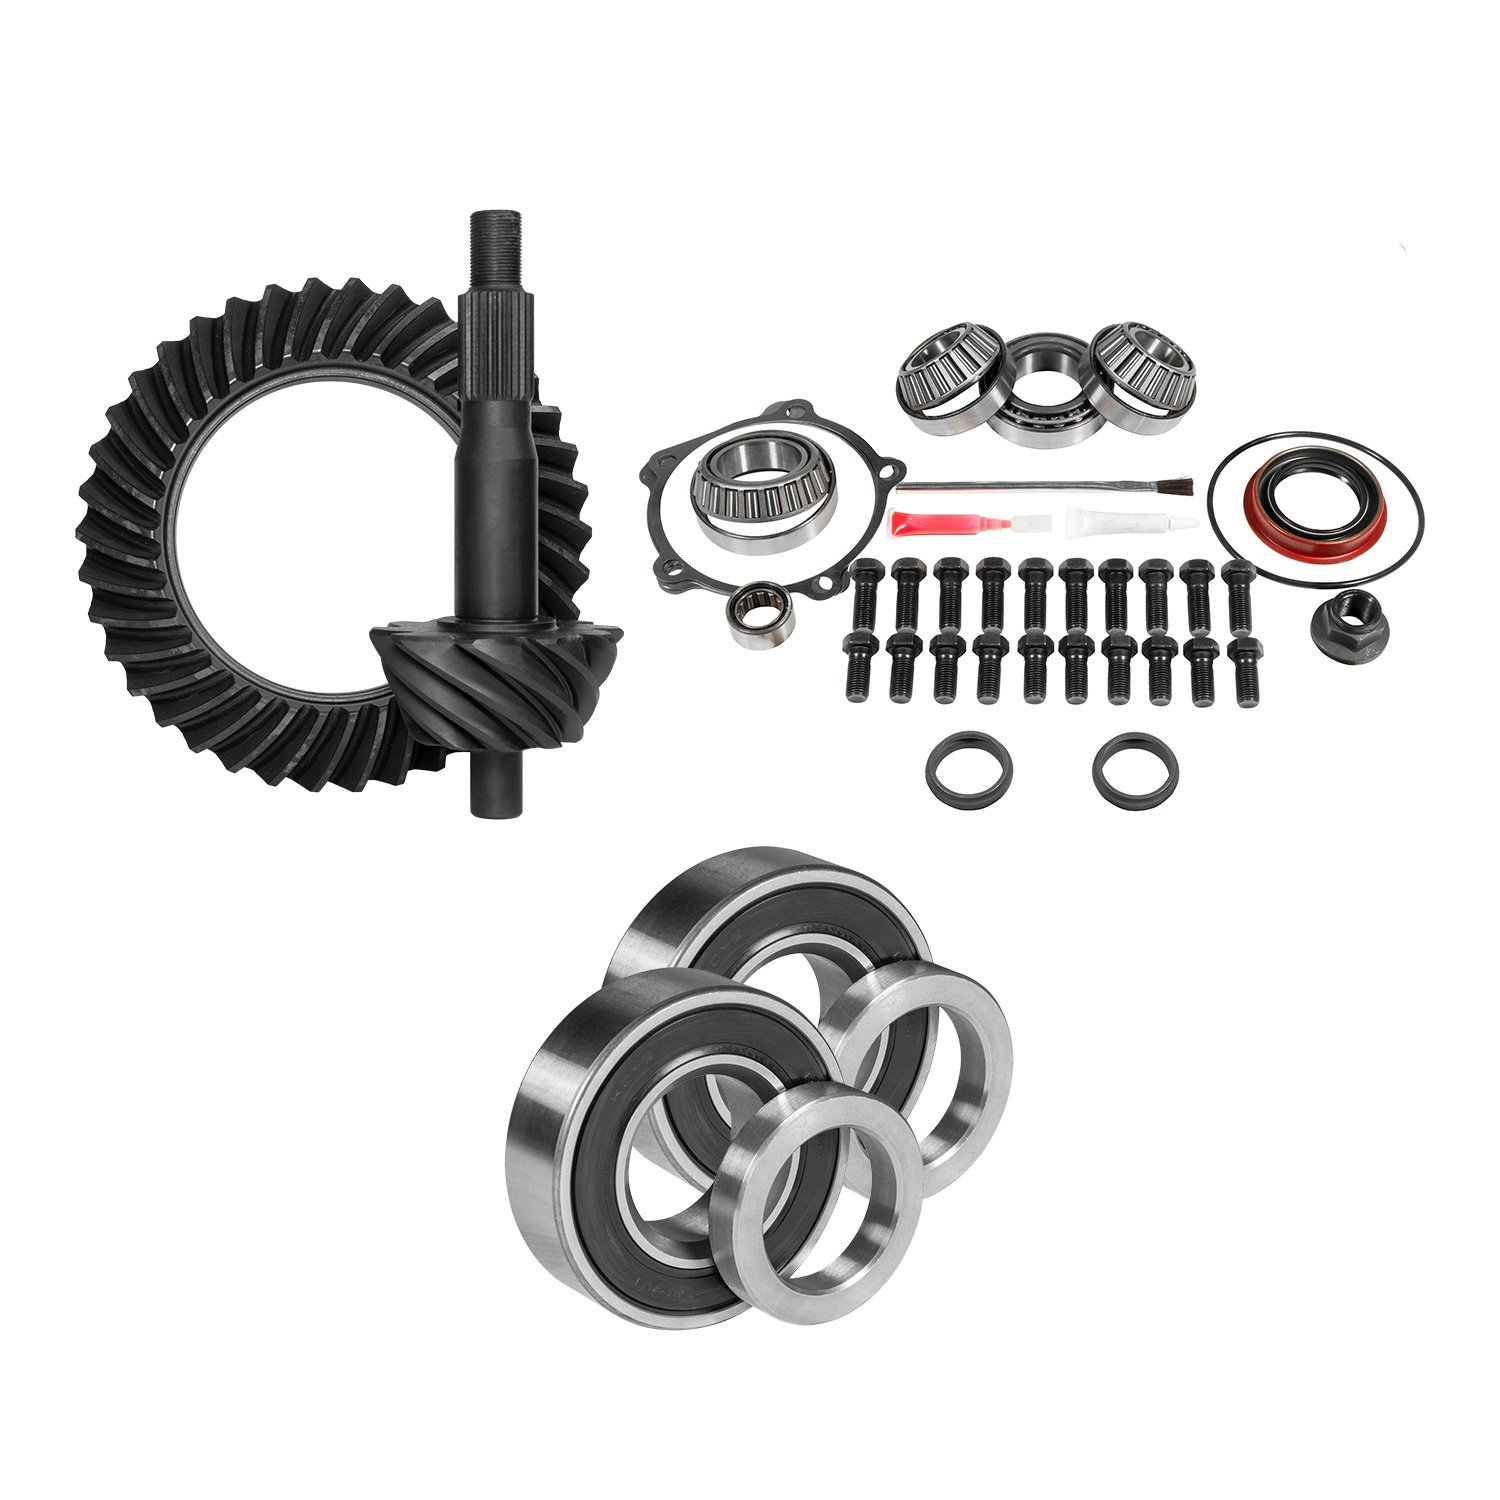 Muscle Car Re-Gear Kit For Ford 8 in. Differential, 25 Spline, 3.55 Ratio